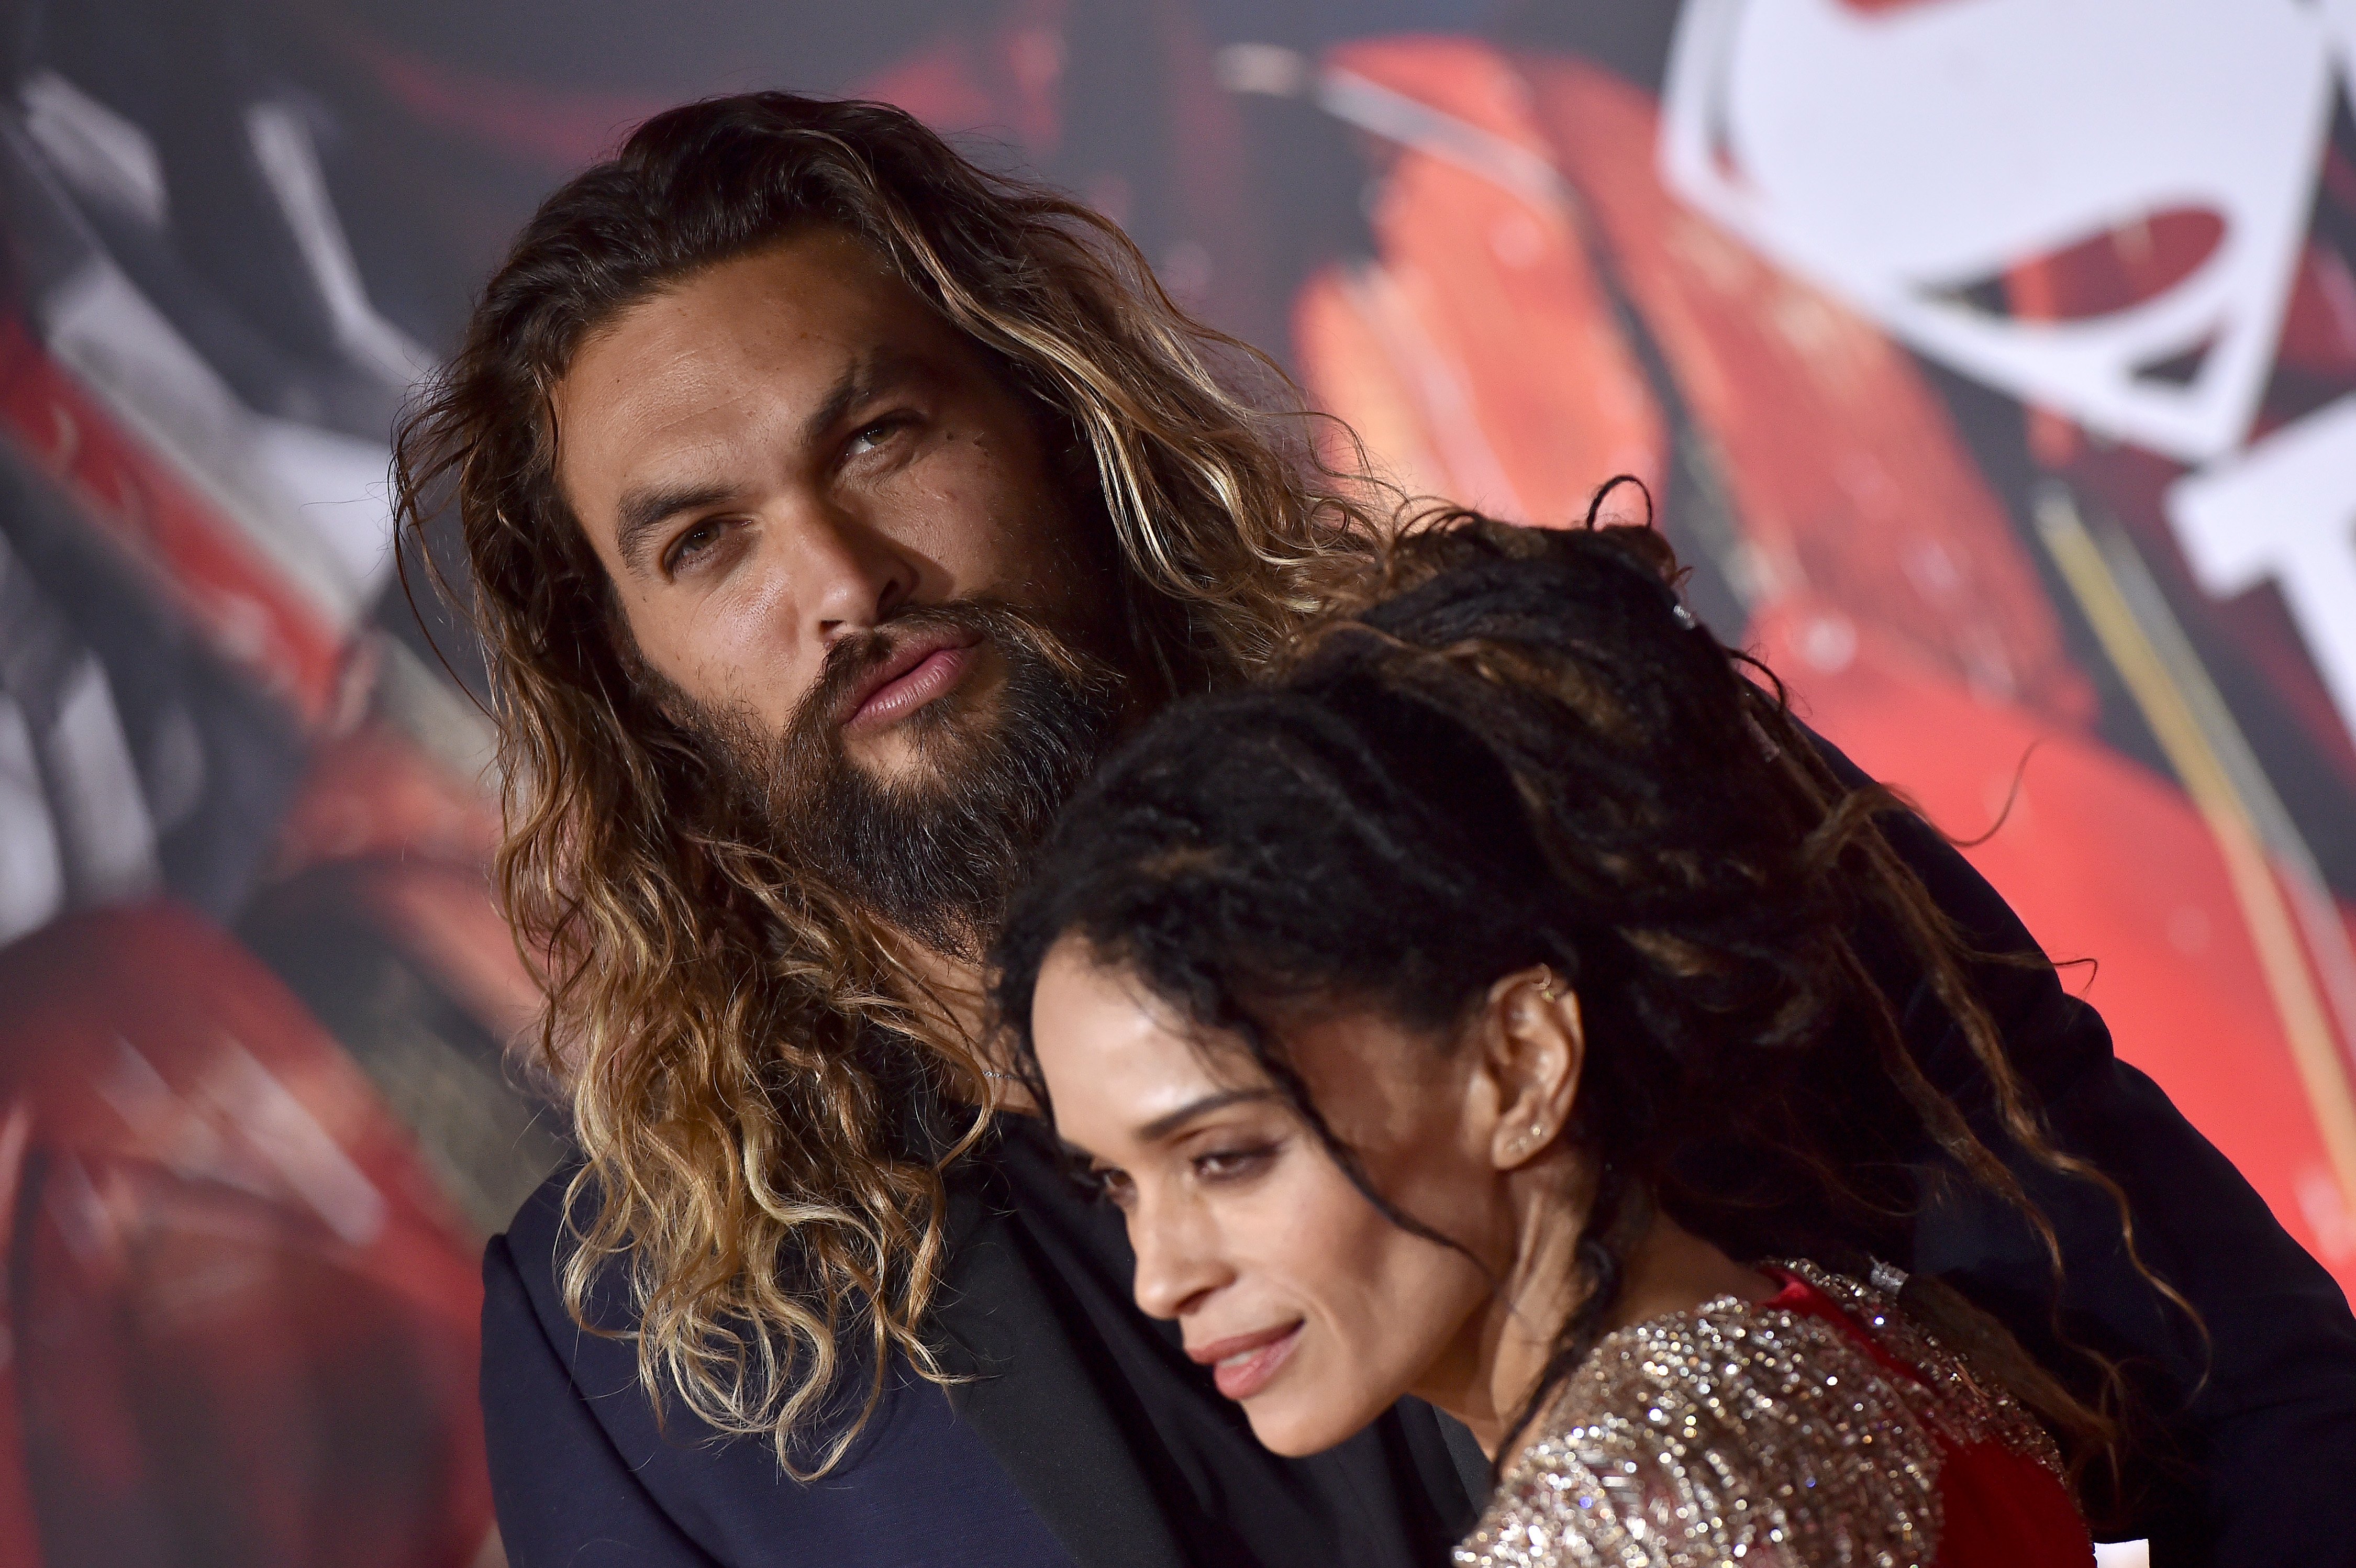 Jason Momoa and Lisa Bonet arrive at the premiere of "Justice League" at Dolby Theatre on November 13, 2017 in Hollywood, California. / Source: Getty Images